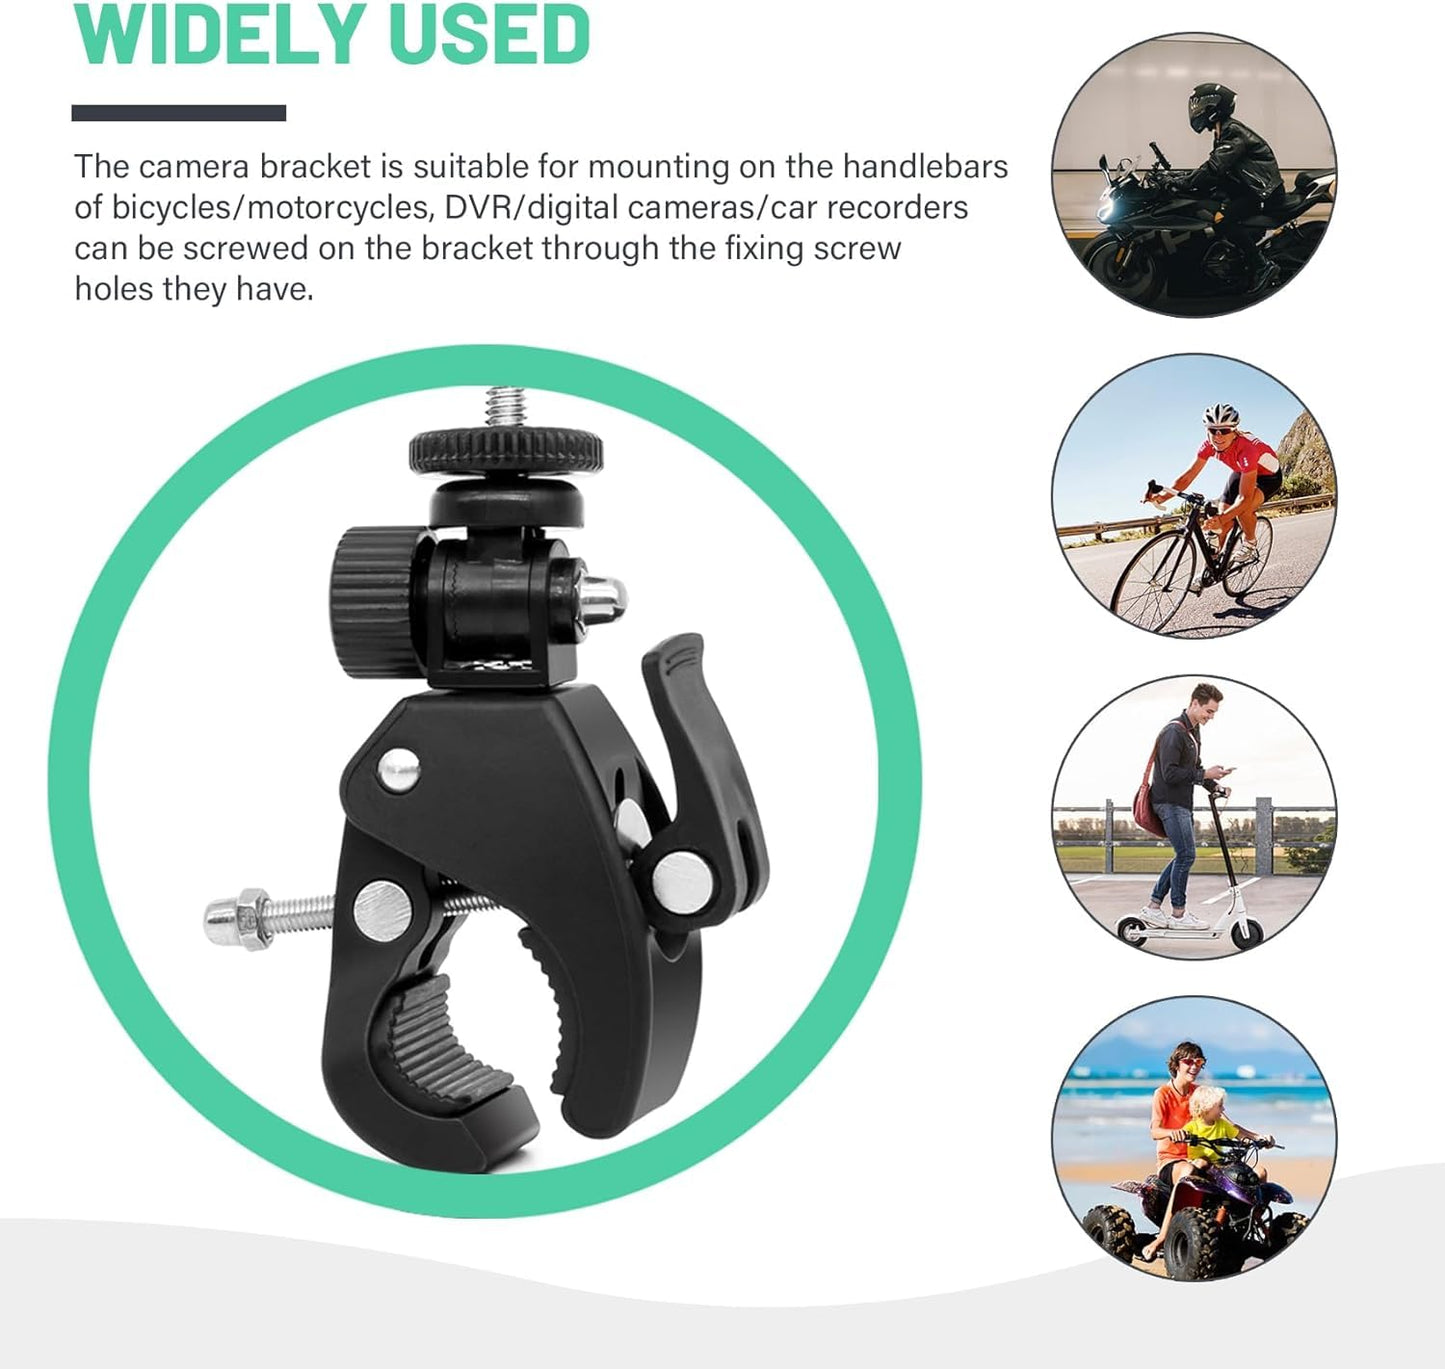 ADZOY Premium Super Clamp Camera Mount Clamp with 360° Rotation, Bike/Bicycle/Motorcycle Handlebar Mount for Insta360/GoPro/AKASO/DJI Osmo Action Cameras, DSLR/Cameras/Lights Pole Tube Mount